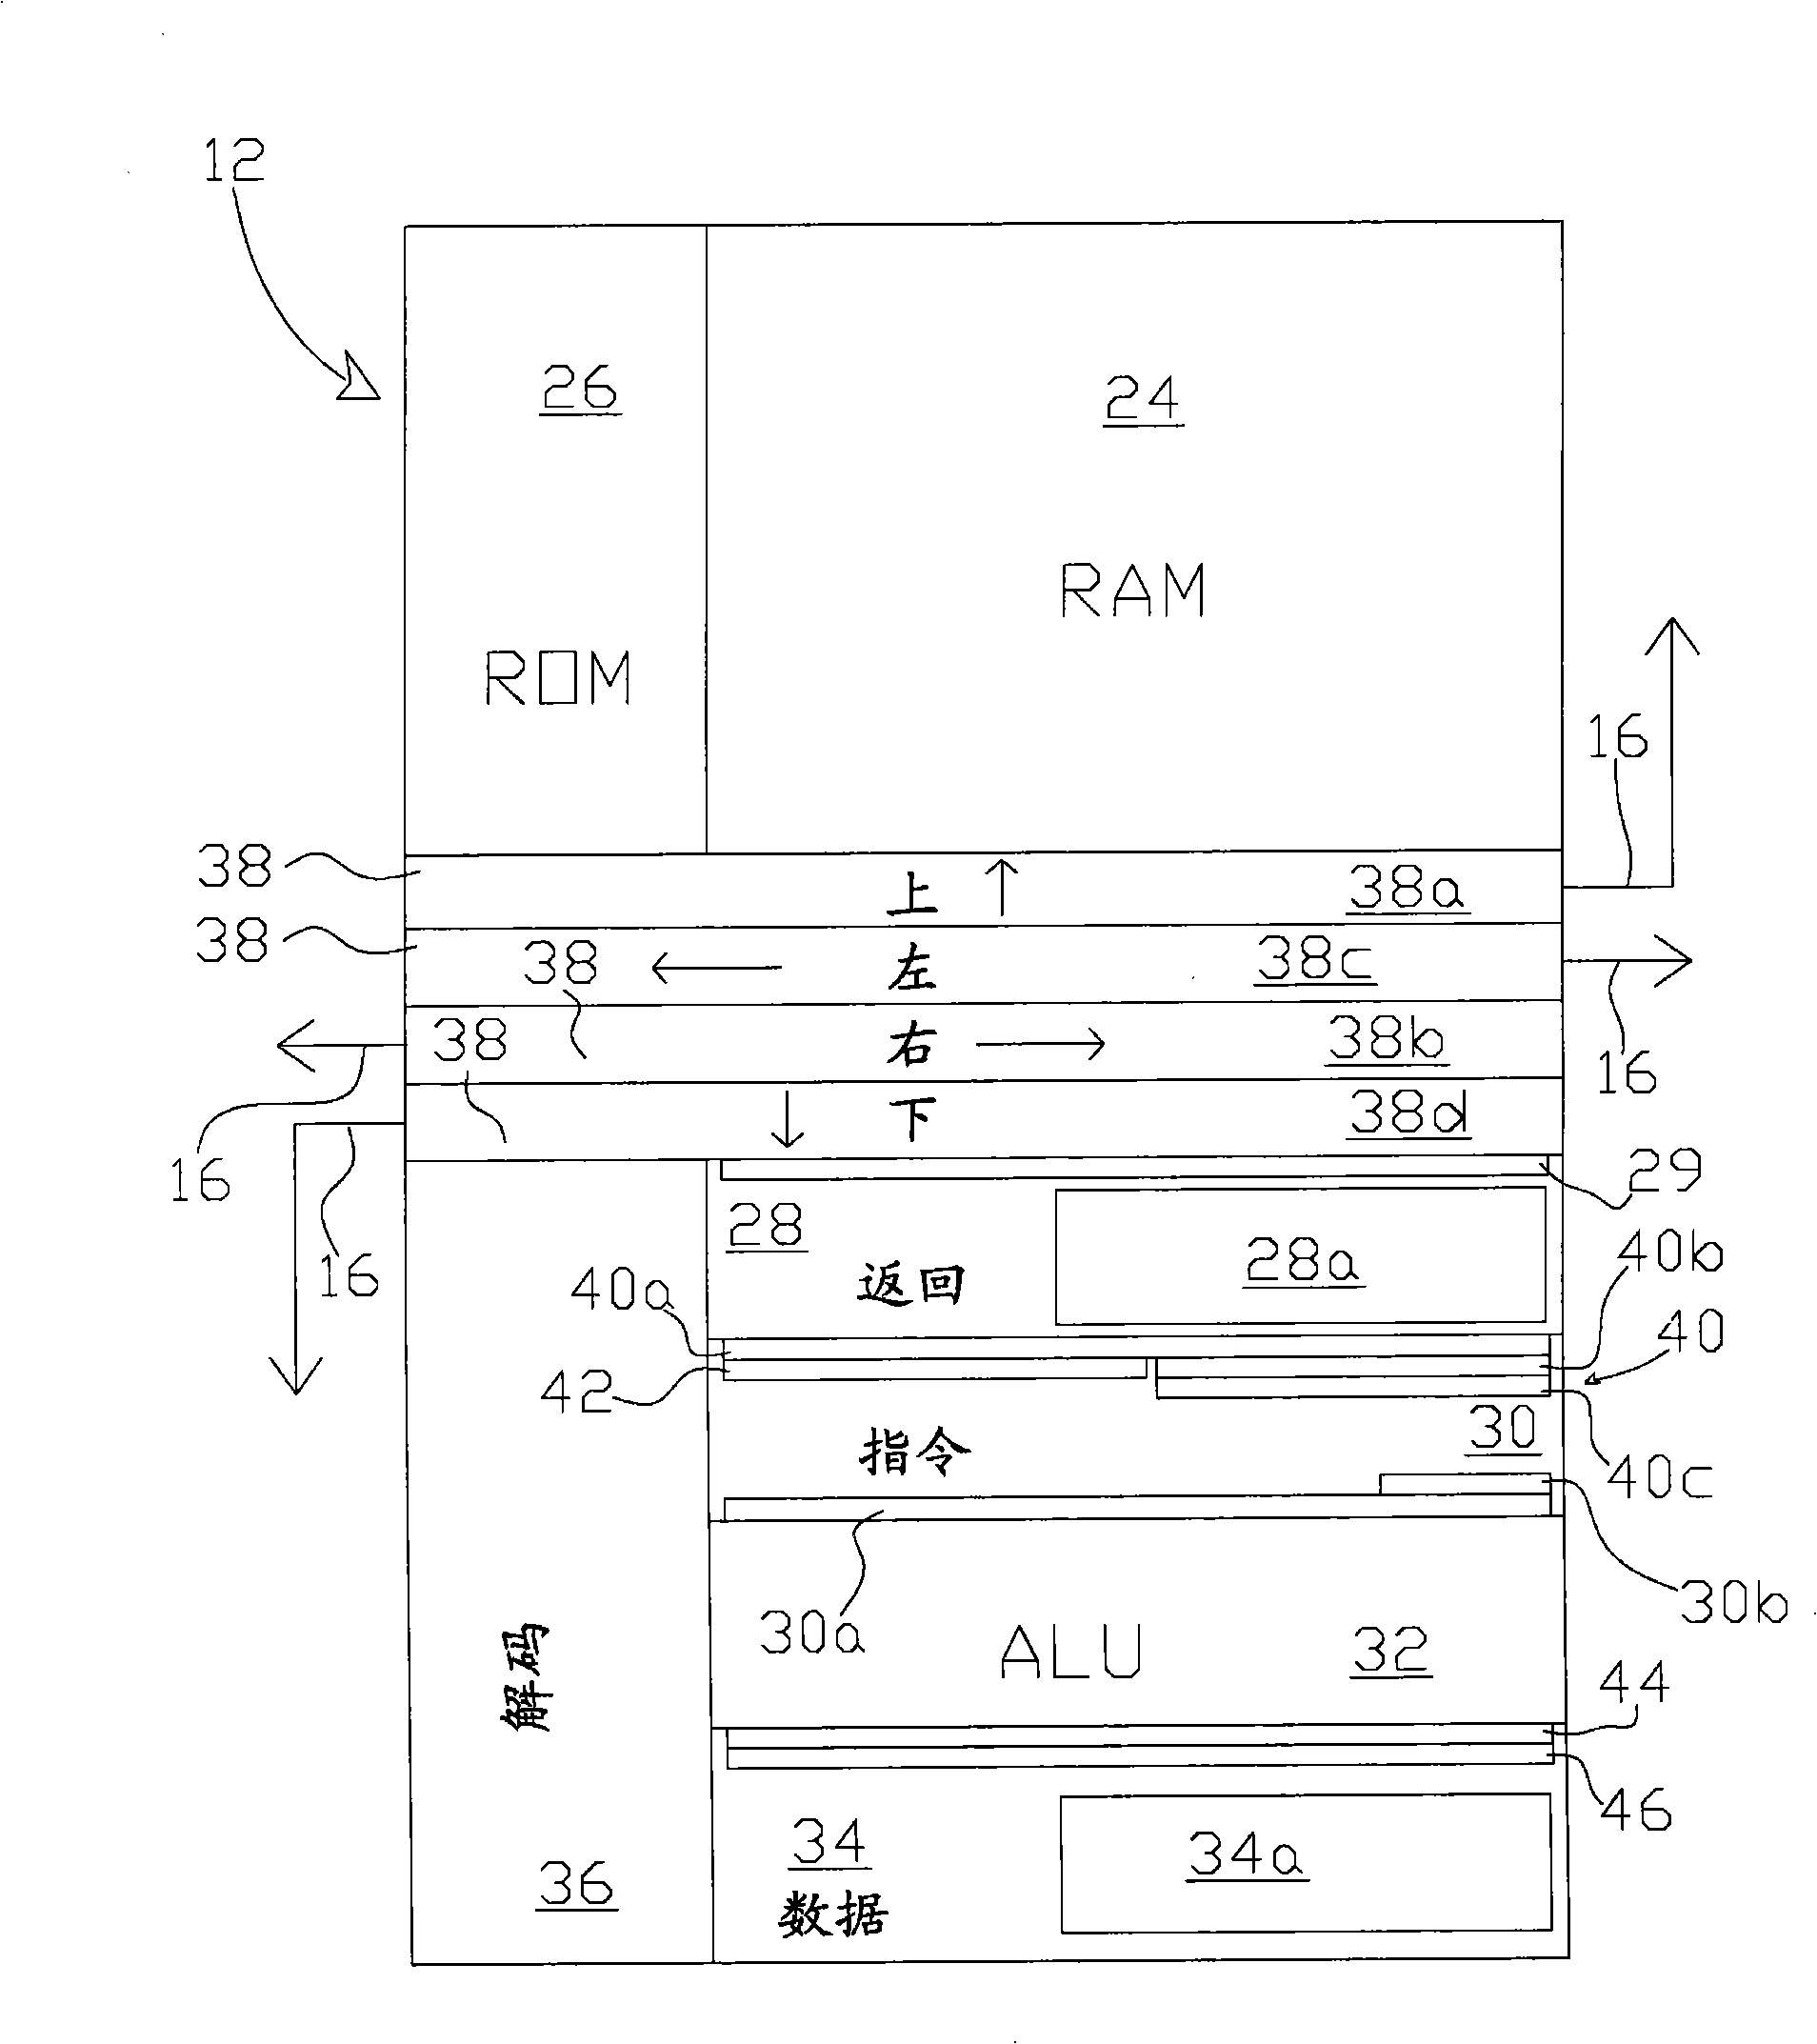 Method and apparatus for loading data and instructions into a computer